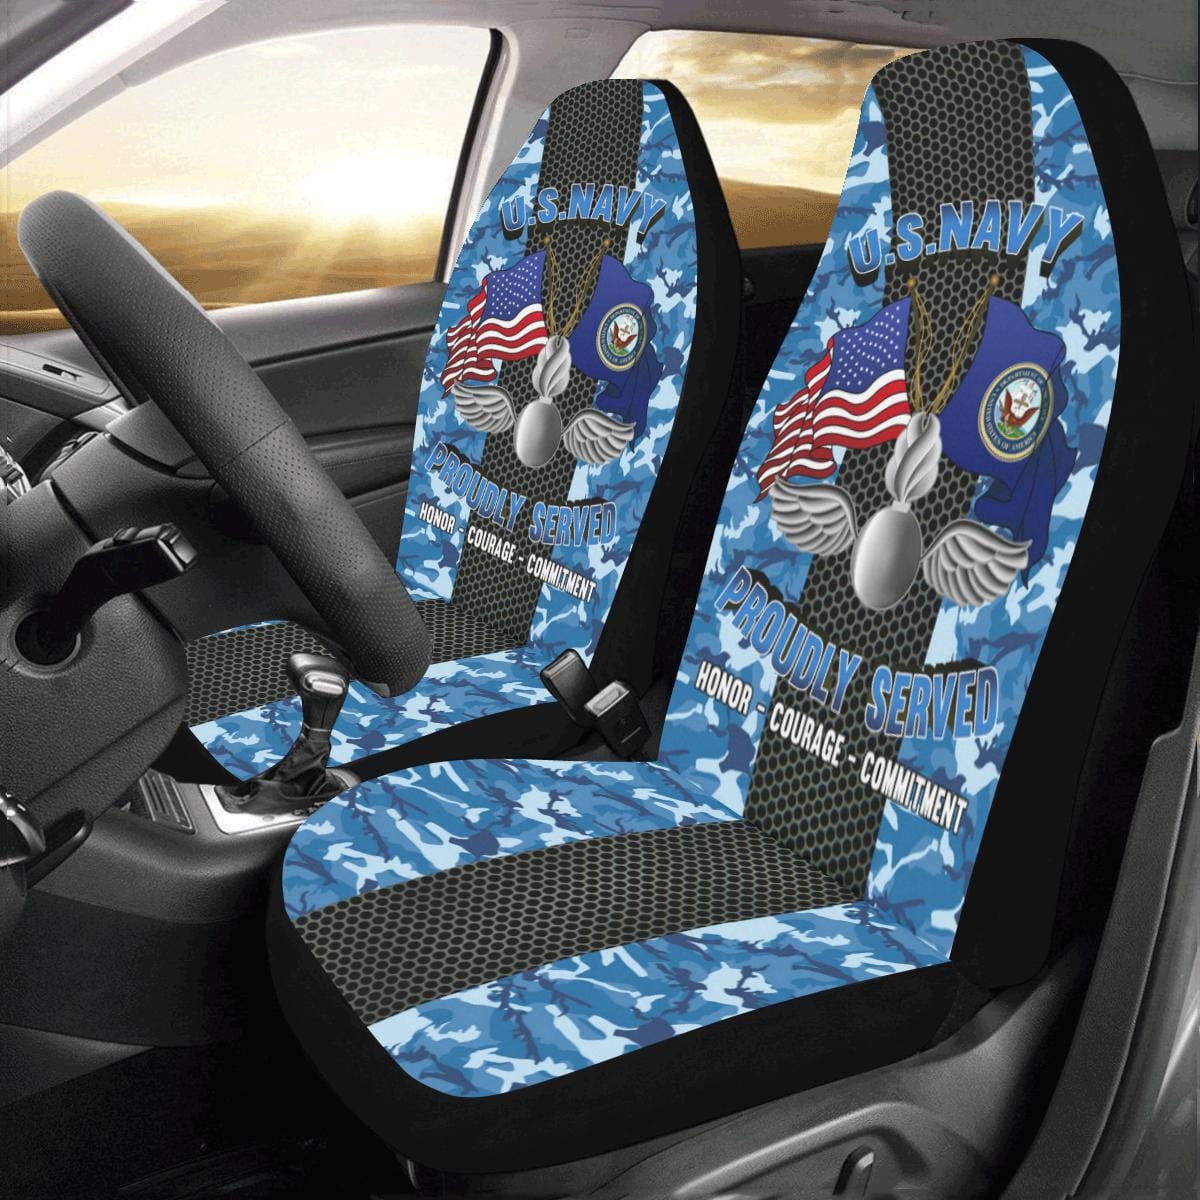 Navy Aviation Ordnanceman Navy AO Car Seat Covers (Set of 2)-SeatCovers-Navy-Rate-Veterans Nation